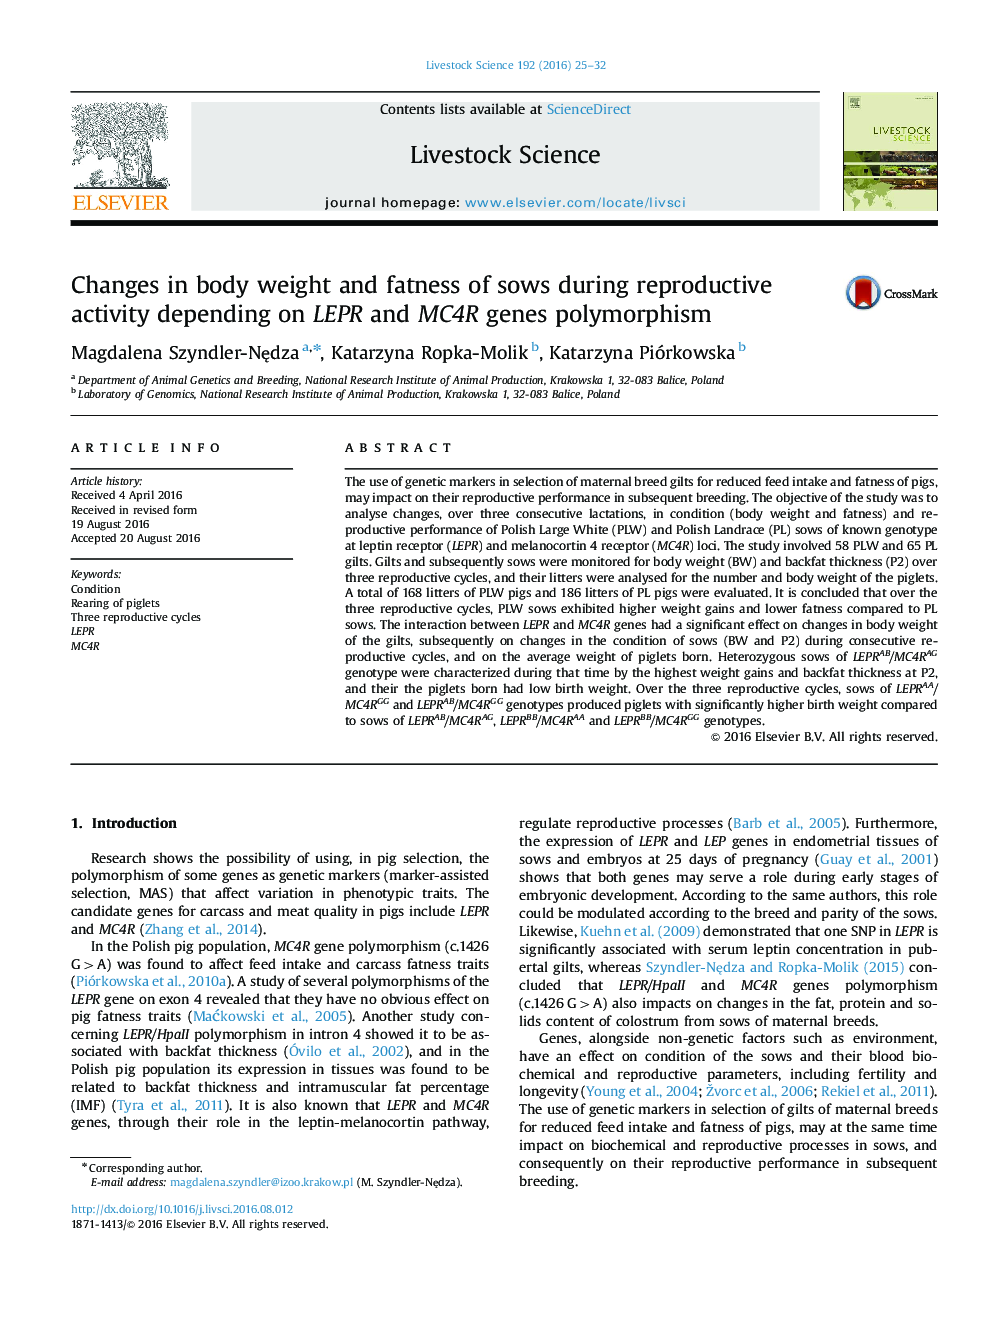 Changes in body weight and fatness of sows during reproductive activity depending on LEPR and MC4R genes polymorphism